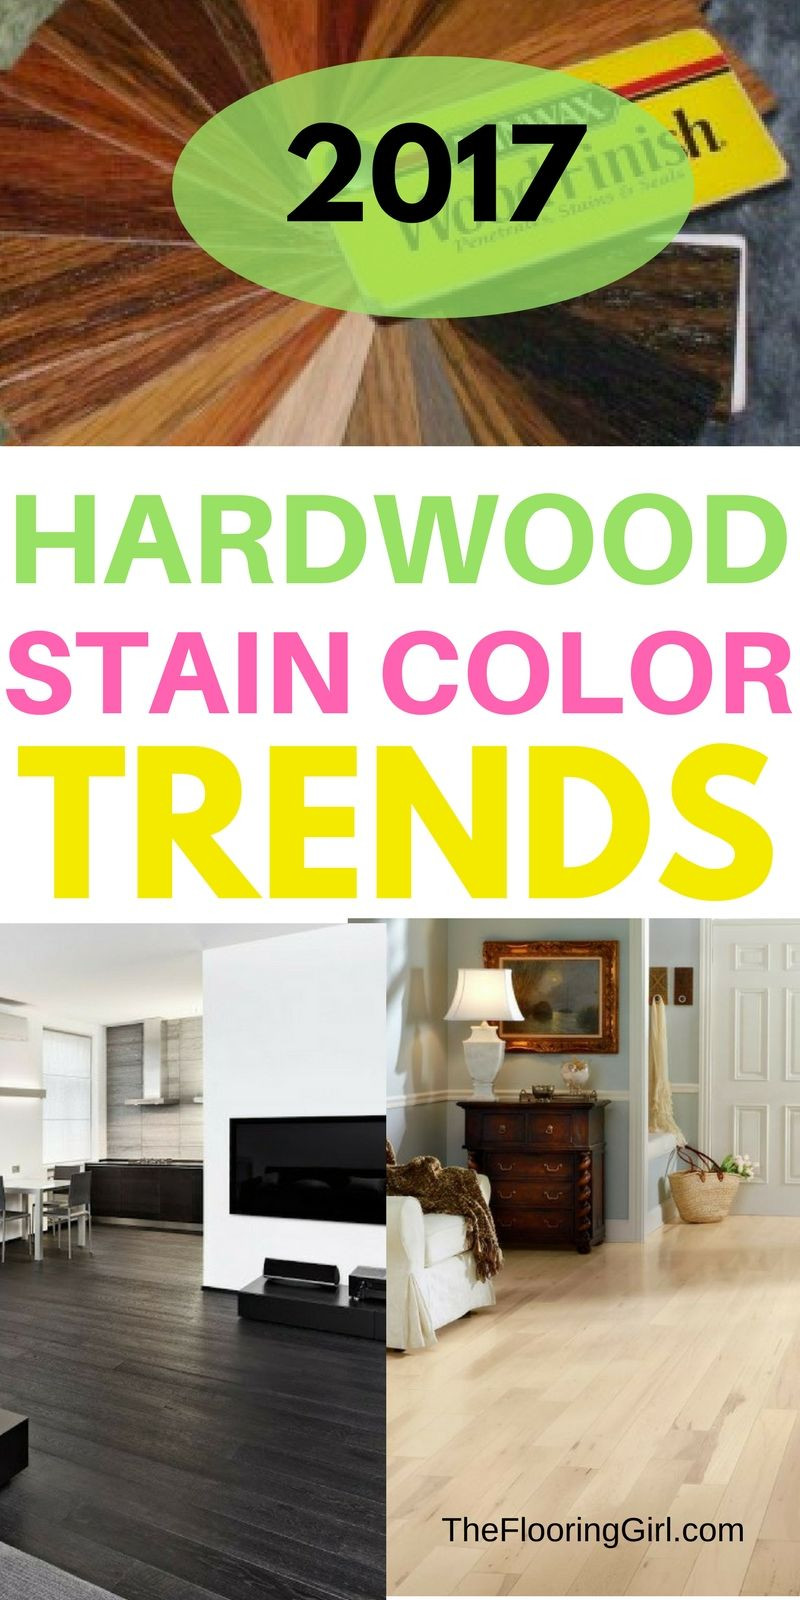 16 Lovely Price for Sanding and Refinishing Hardwood Floors 2022 free download price for sanding and refinishing hardwood floors of hardwood flooring stain color trends 2018 more from the flooring inside hardwood flooring stain color trends for 2017 hardwood colors tha